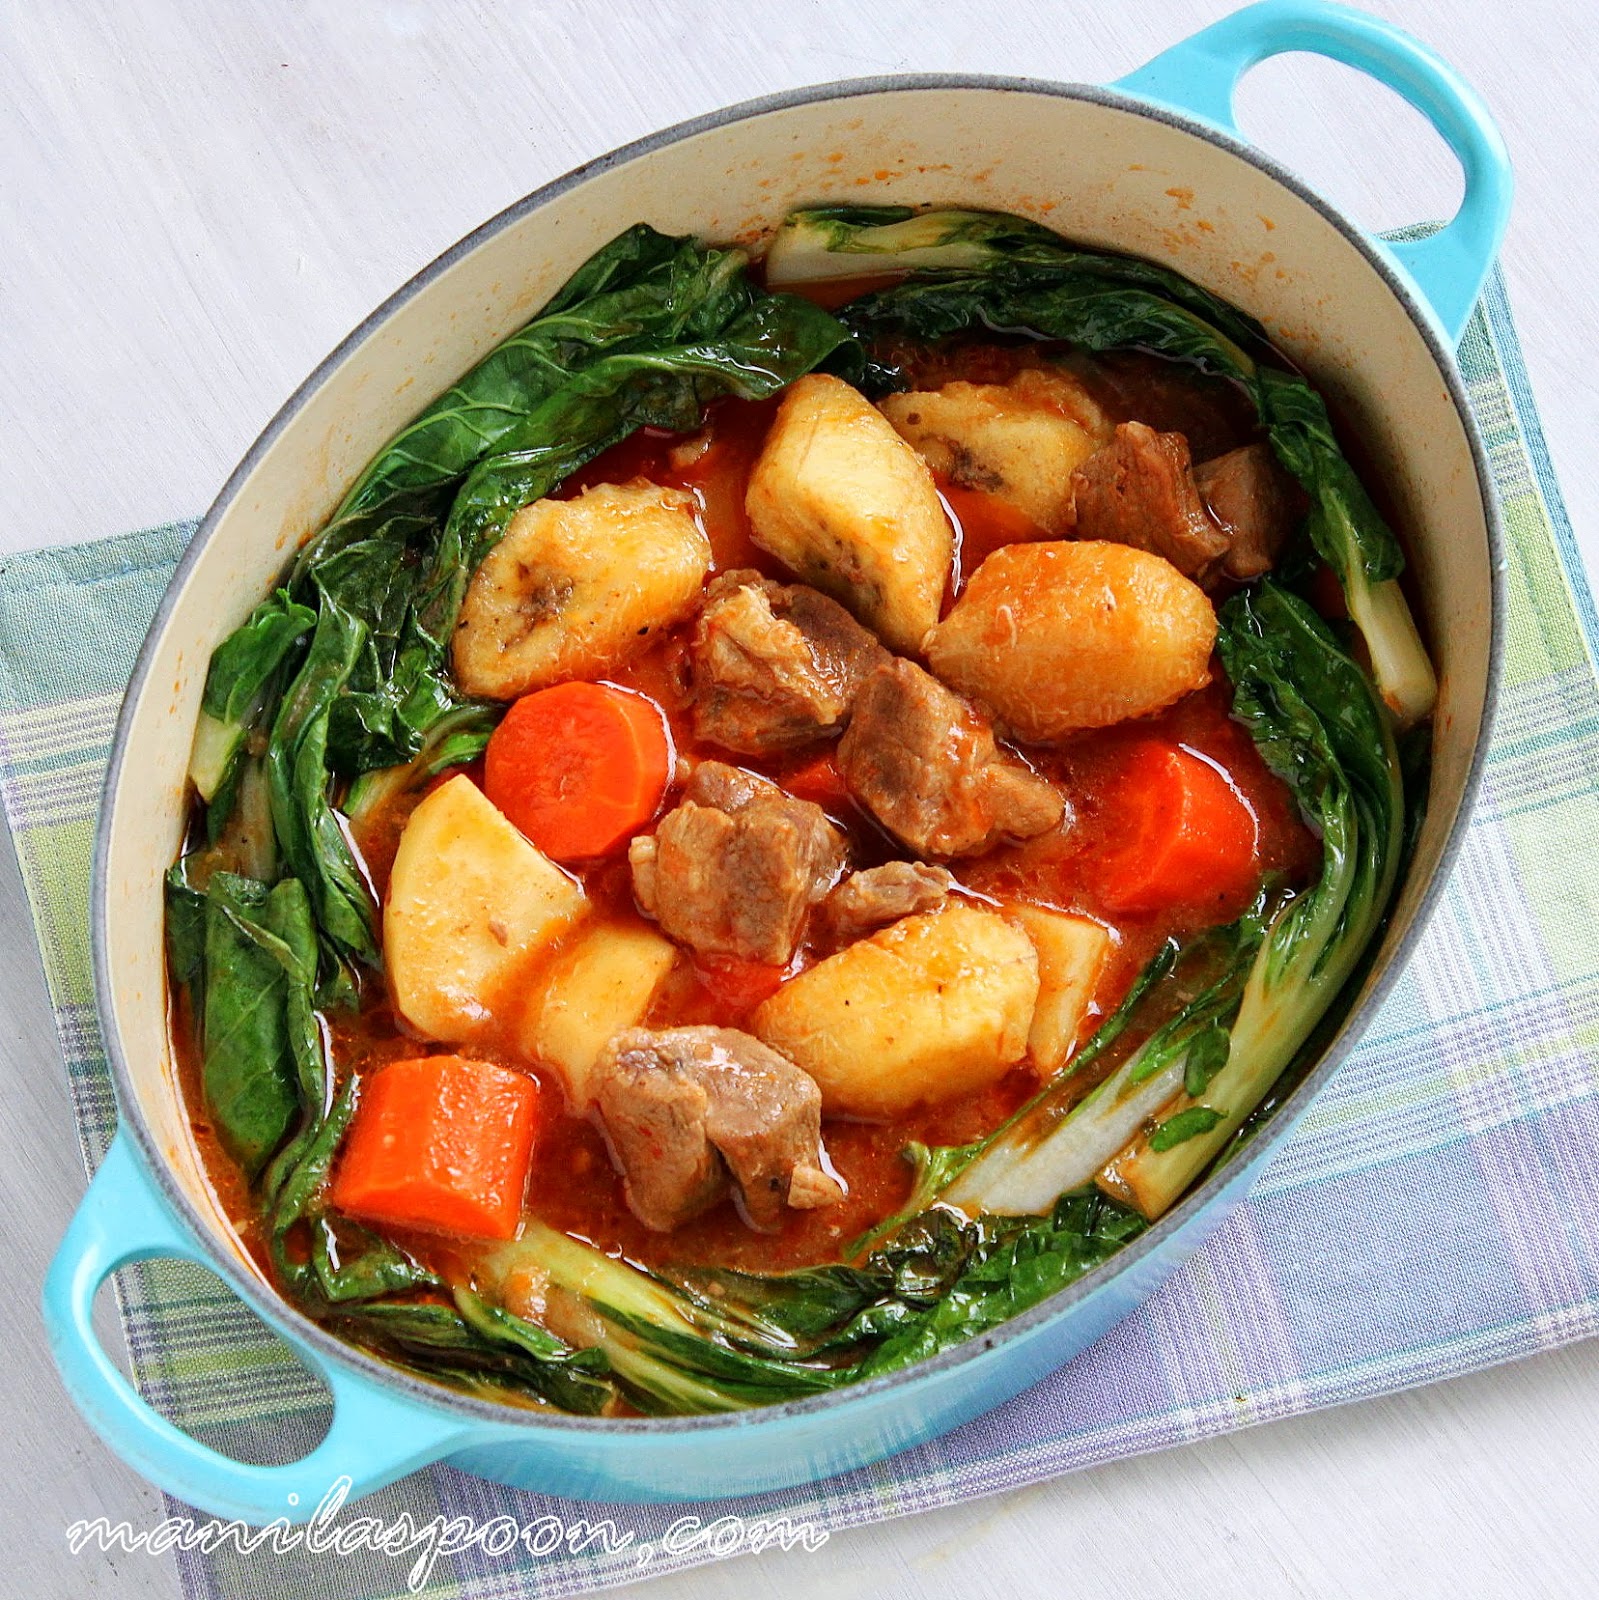 Adding bananas into this melt-in-your-mouth tender beef or pork stew brings so much flavor and richness to this Asian classic. This Filipino stew is a huge family favorite and a dish you'll make over and over again! #pochero #filipinofood #asiancuisine #pork #beef